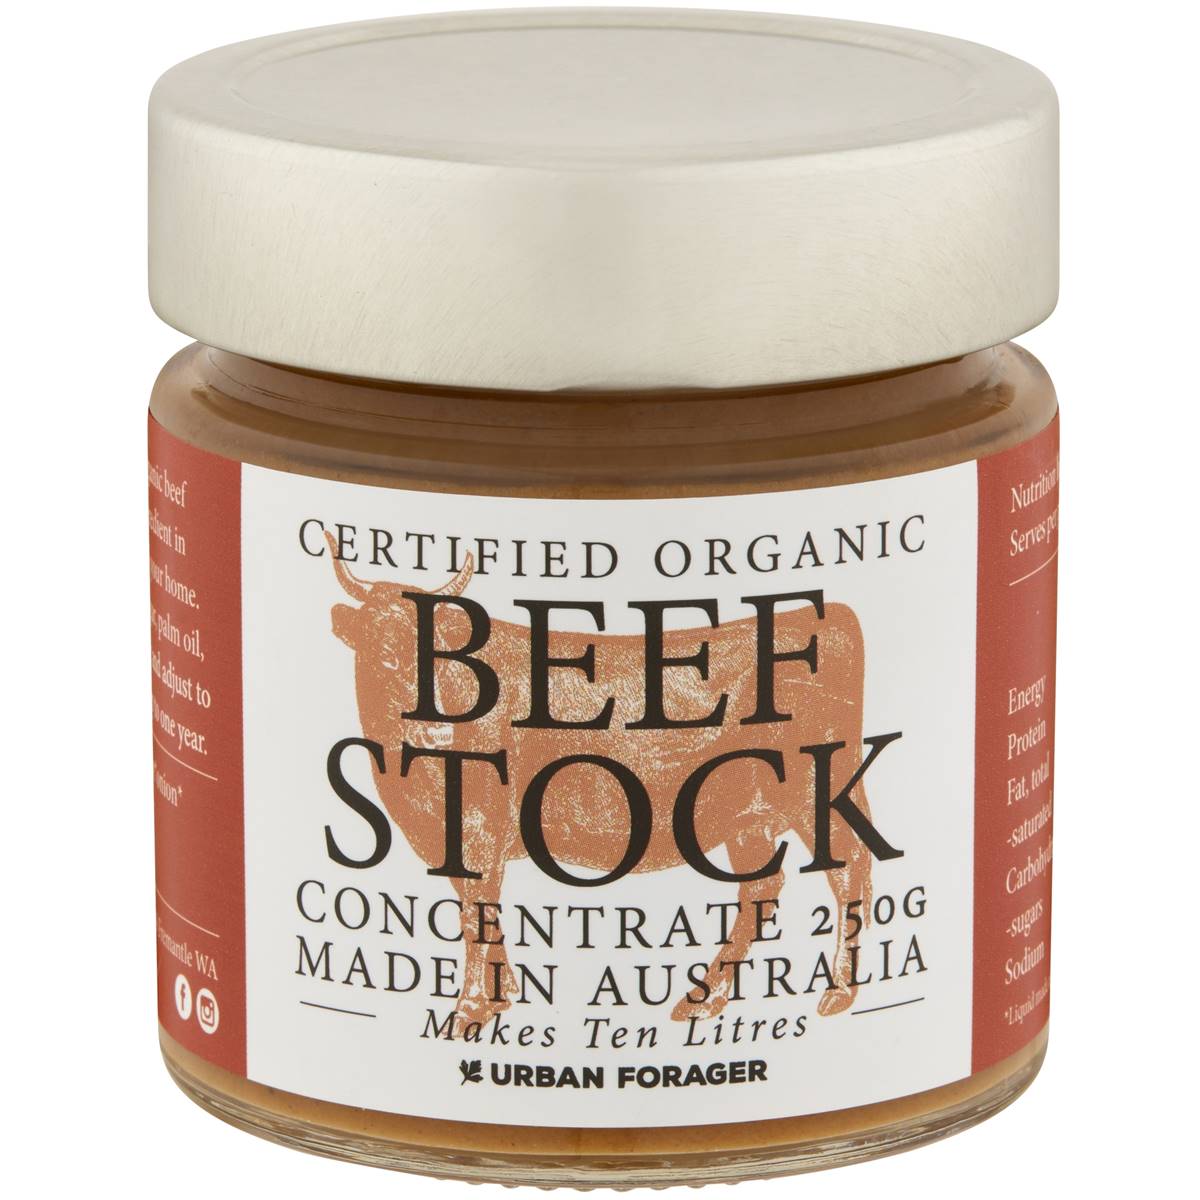 Calories in Urban Forager Organic Beef Stock